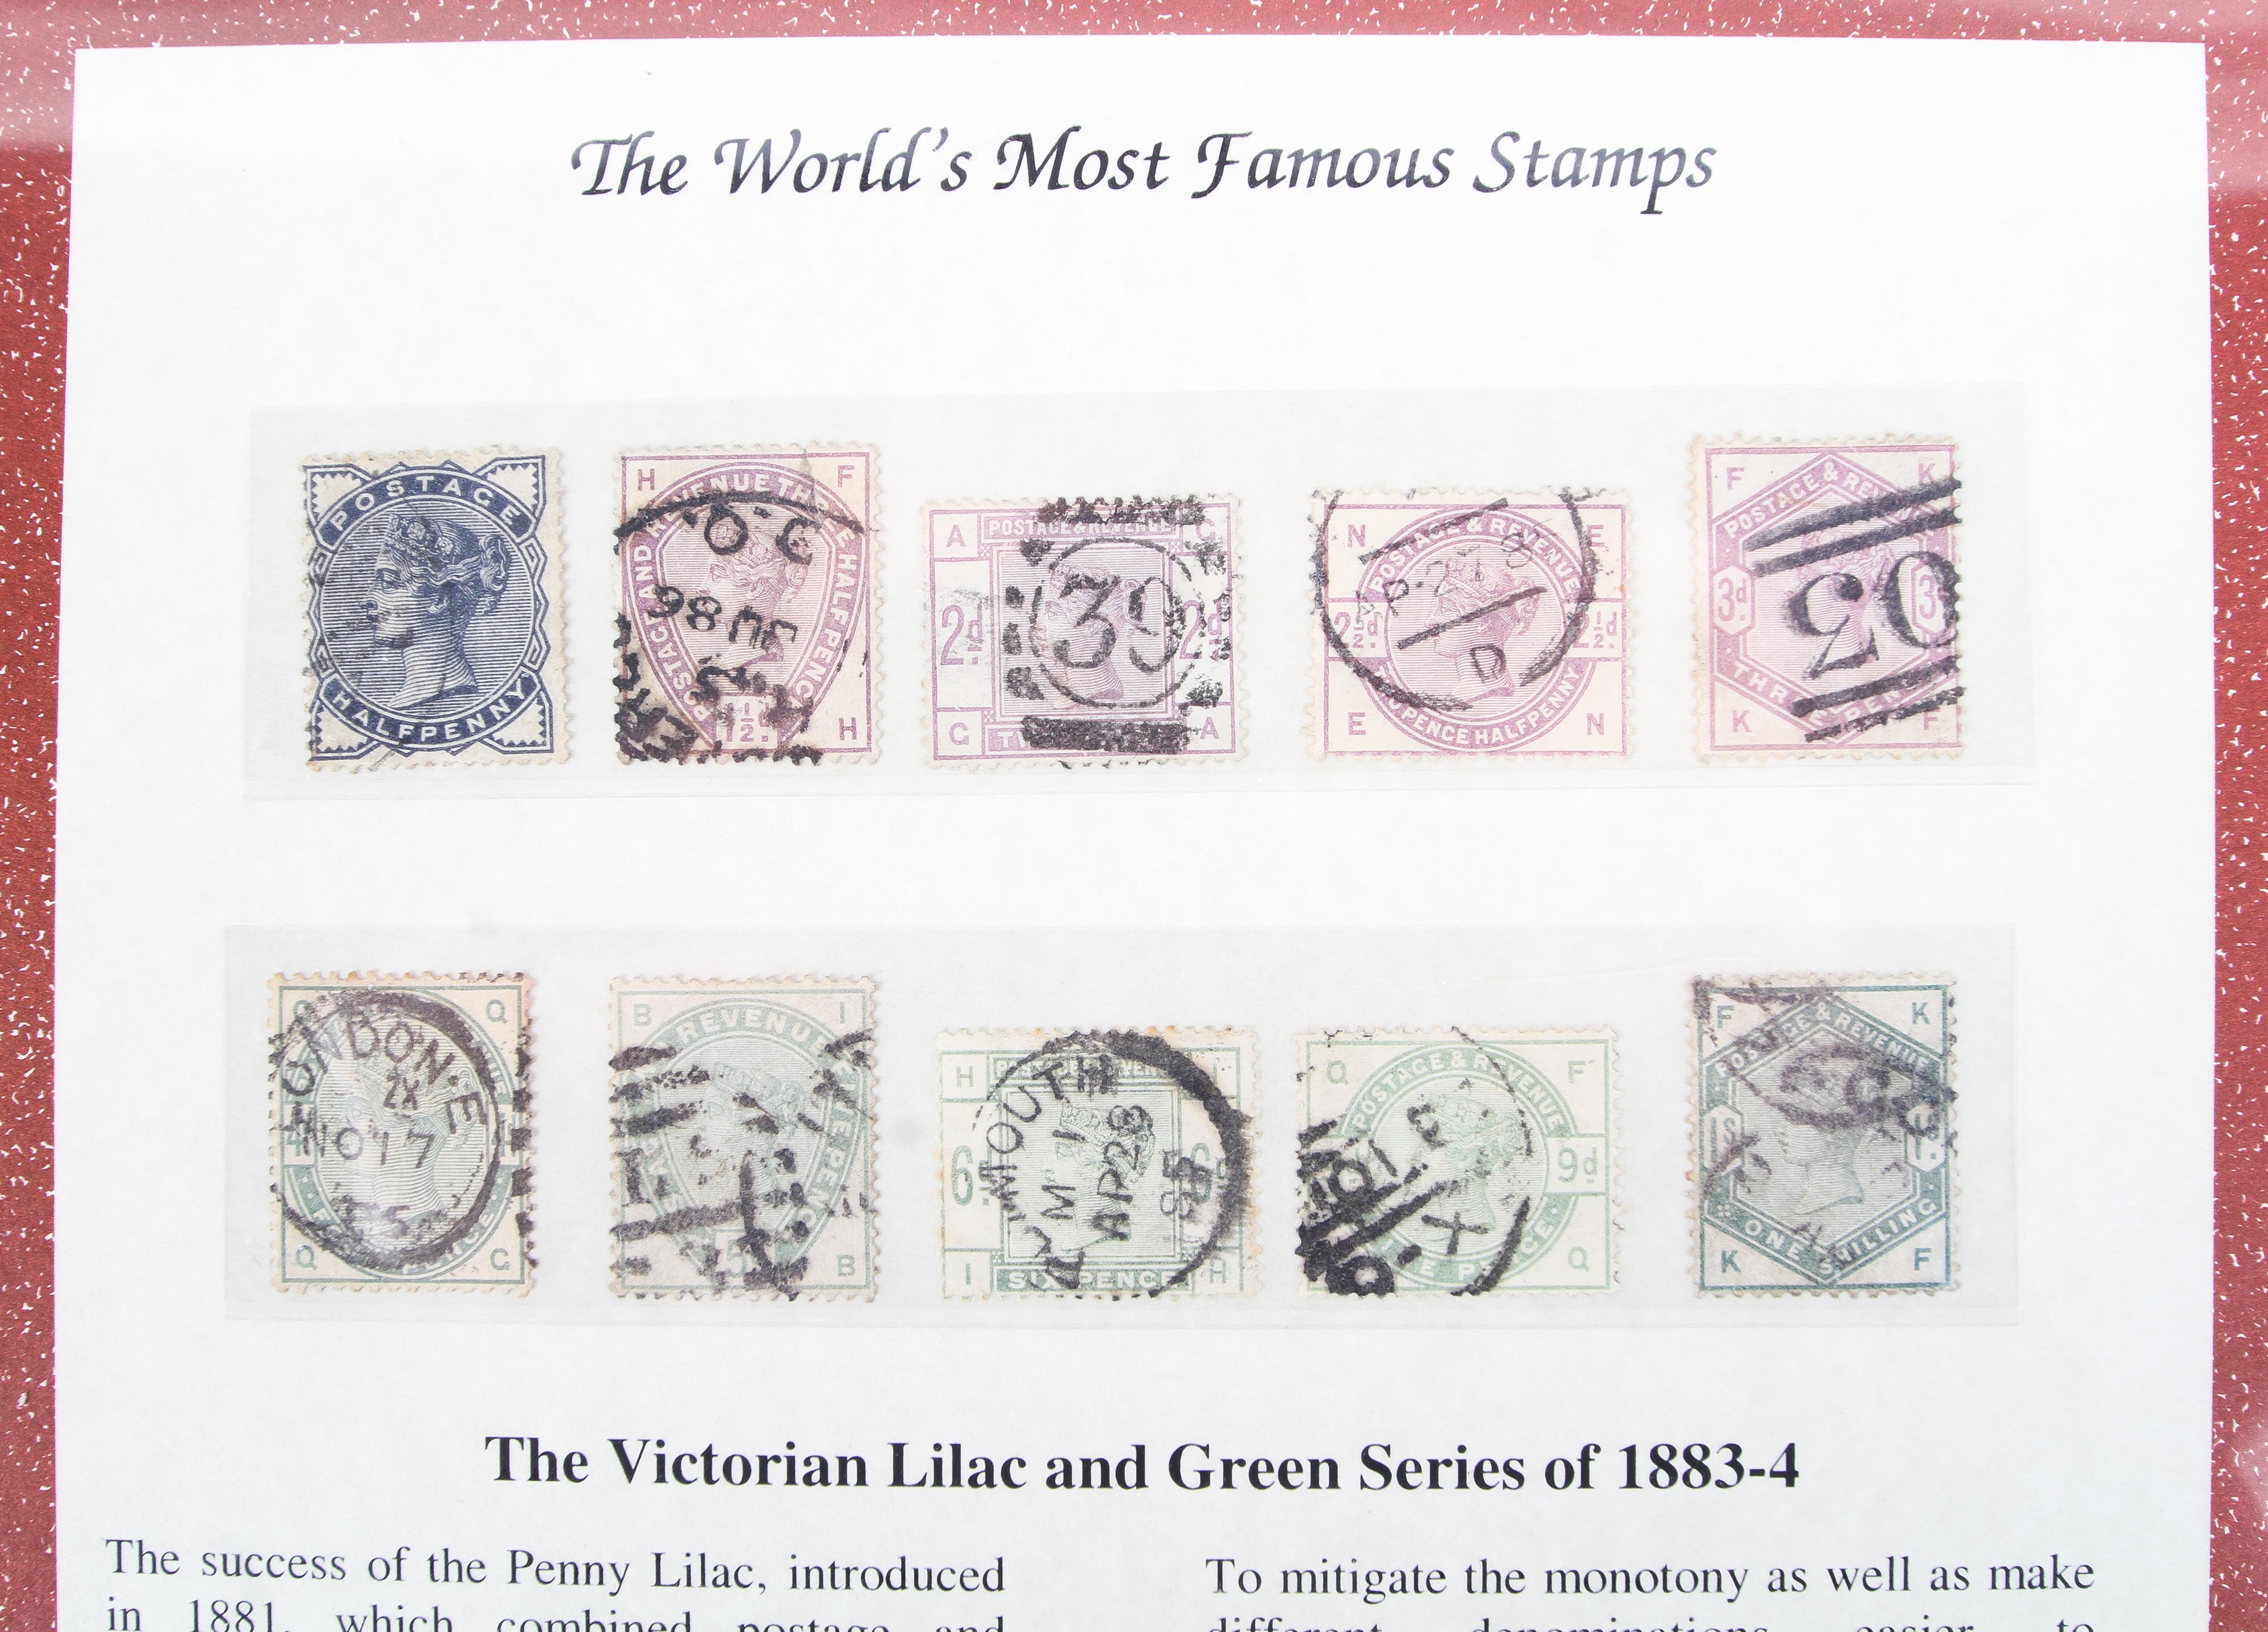 A Westminster Collection Ltd folder containing the Victorian Lilac and Green 1883-4 stamps. - Image 2 of 2